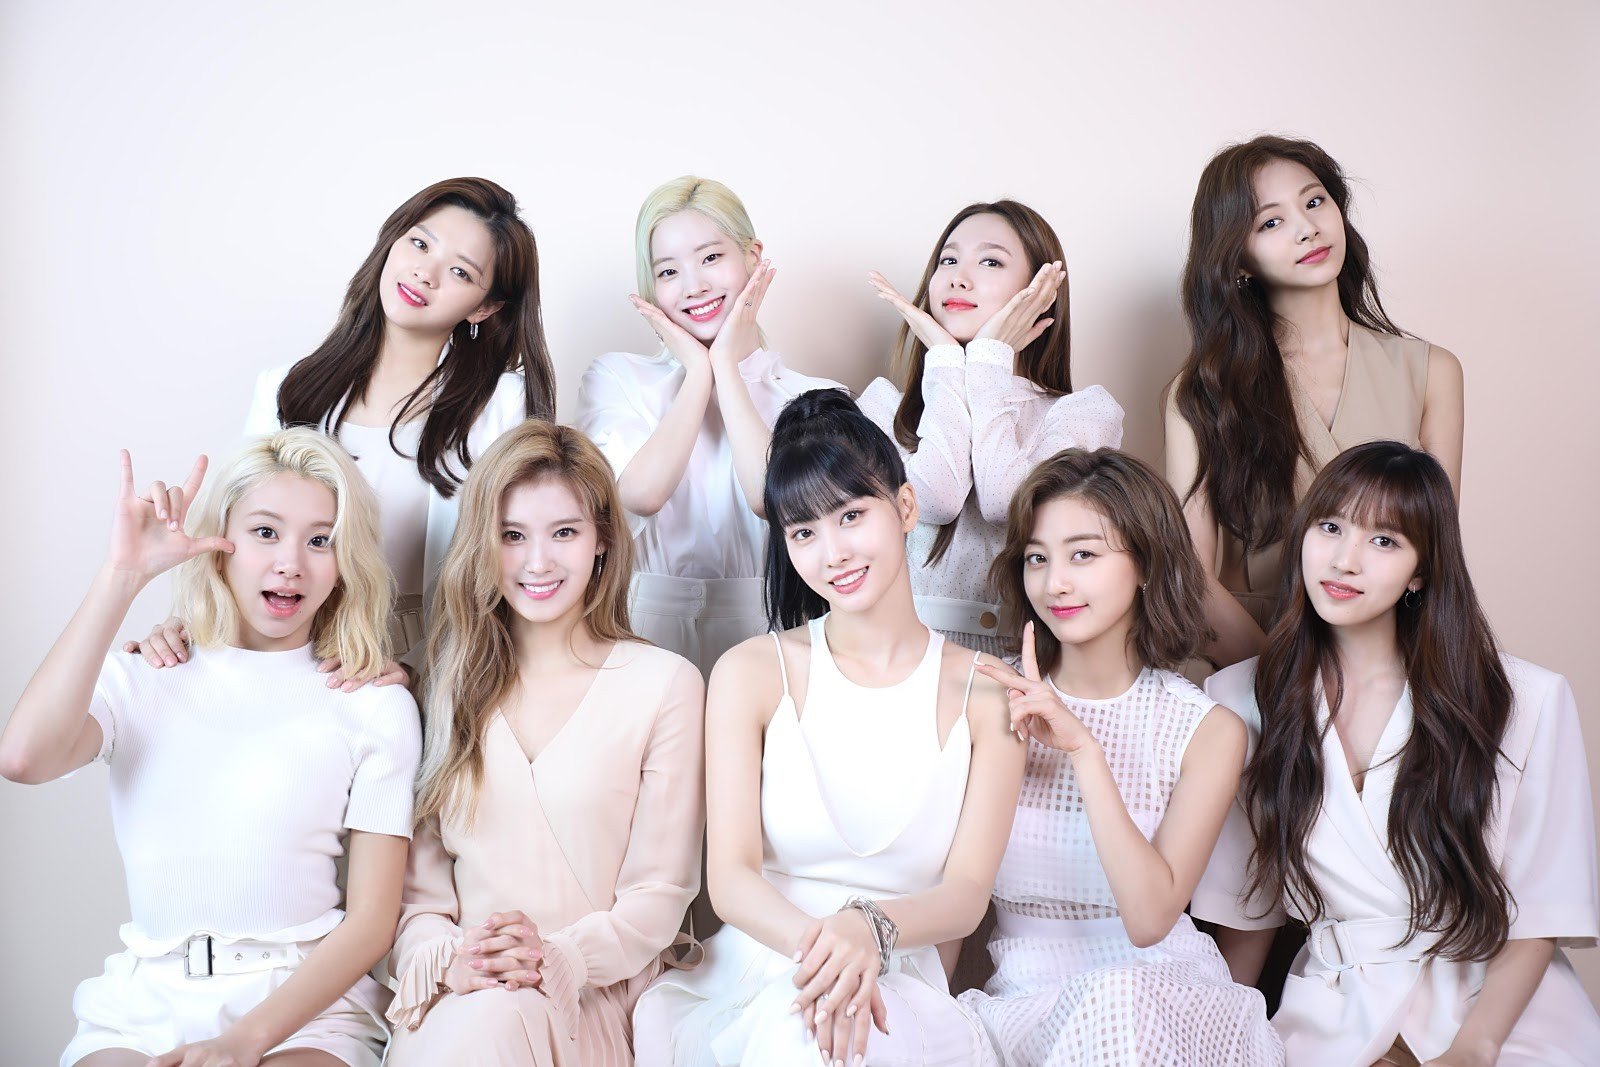 K-pop girl group Twice have been streaming lots of quirky content online.